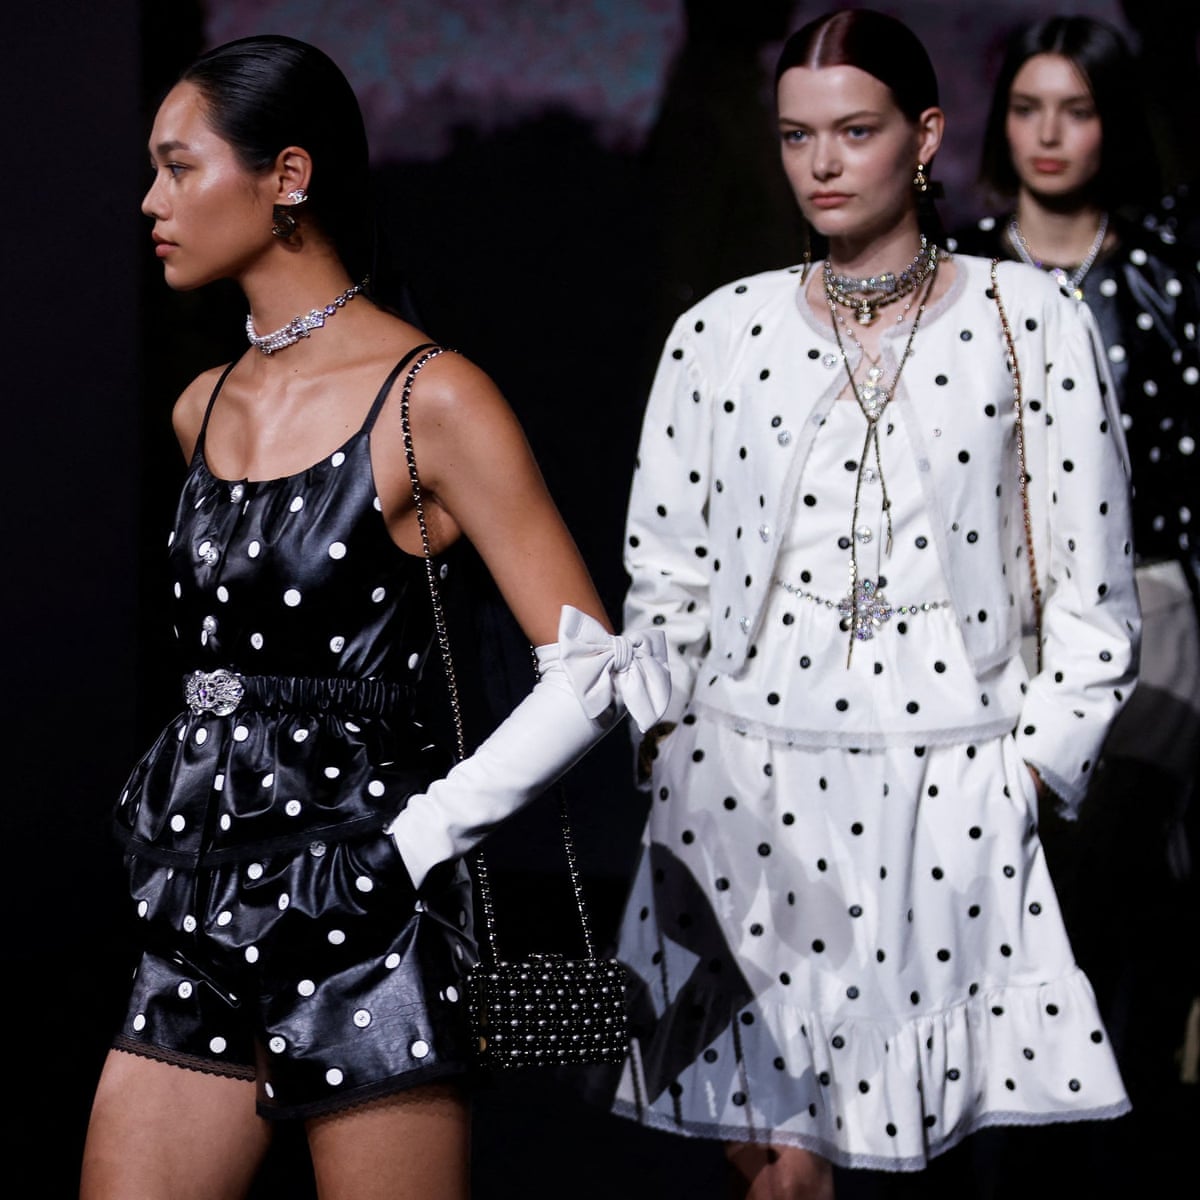 We prefer a dream over controversy': Chanel at Paris fashion week | Chanel  | The Guardian